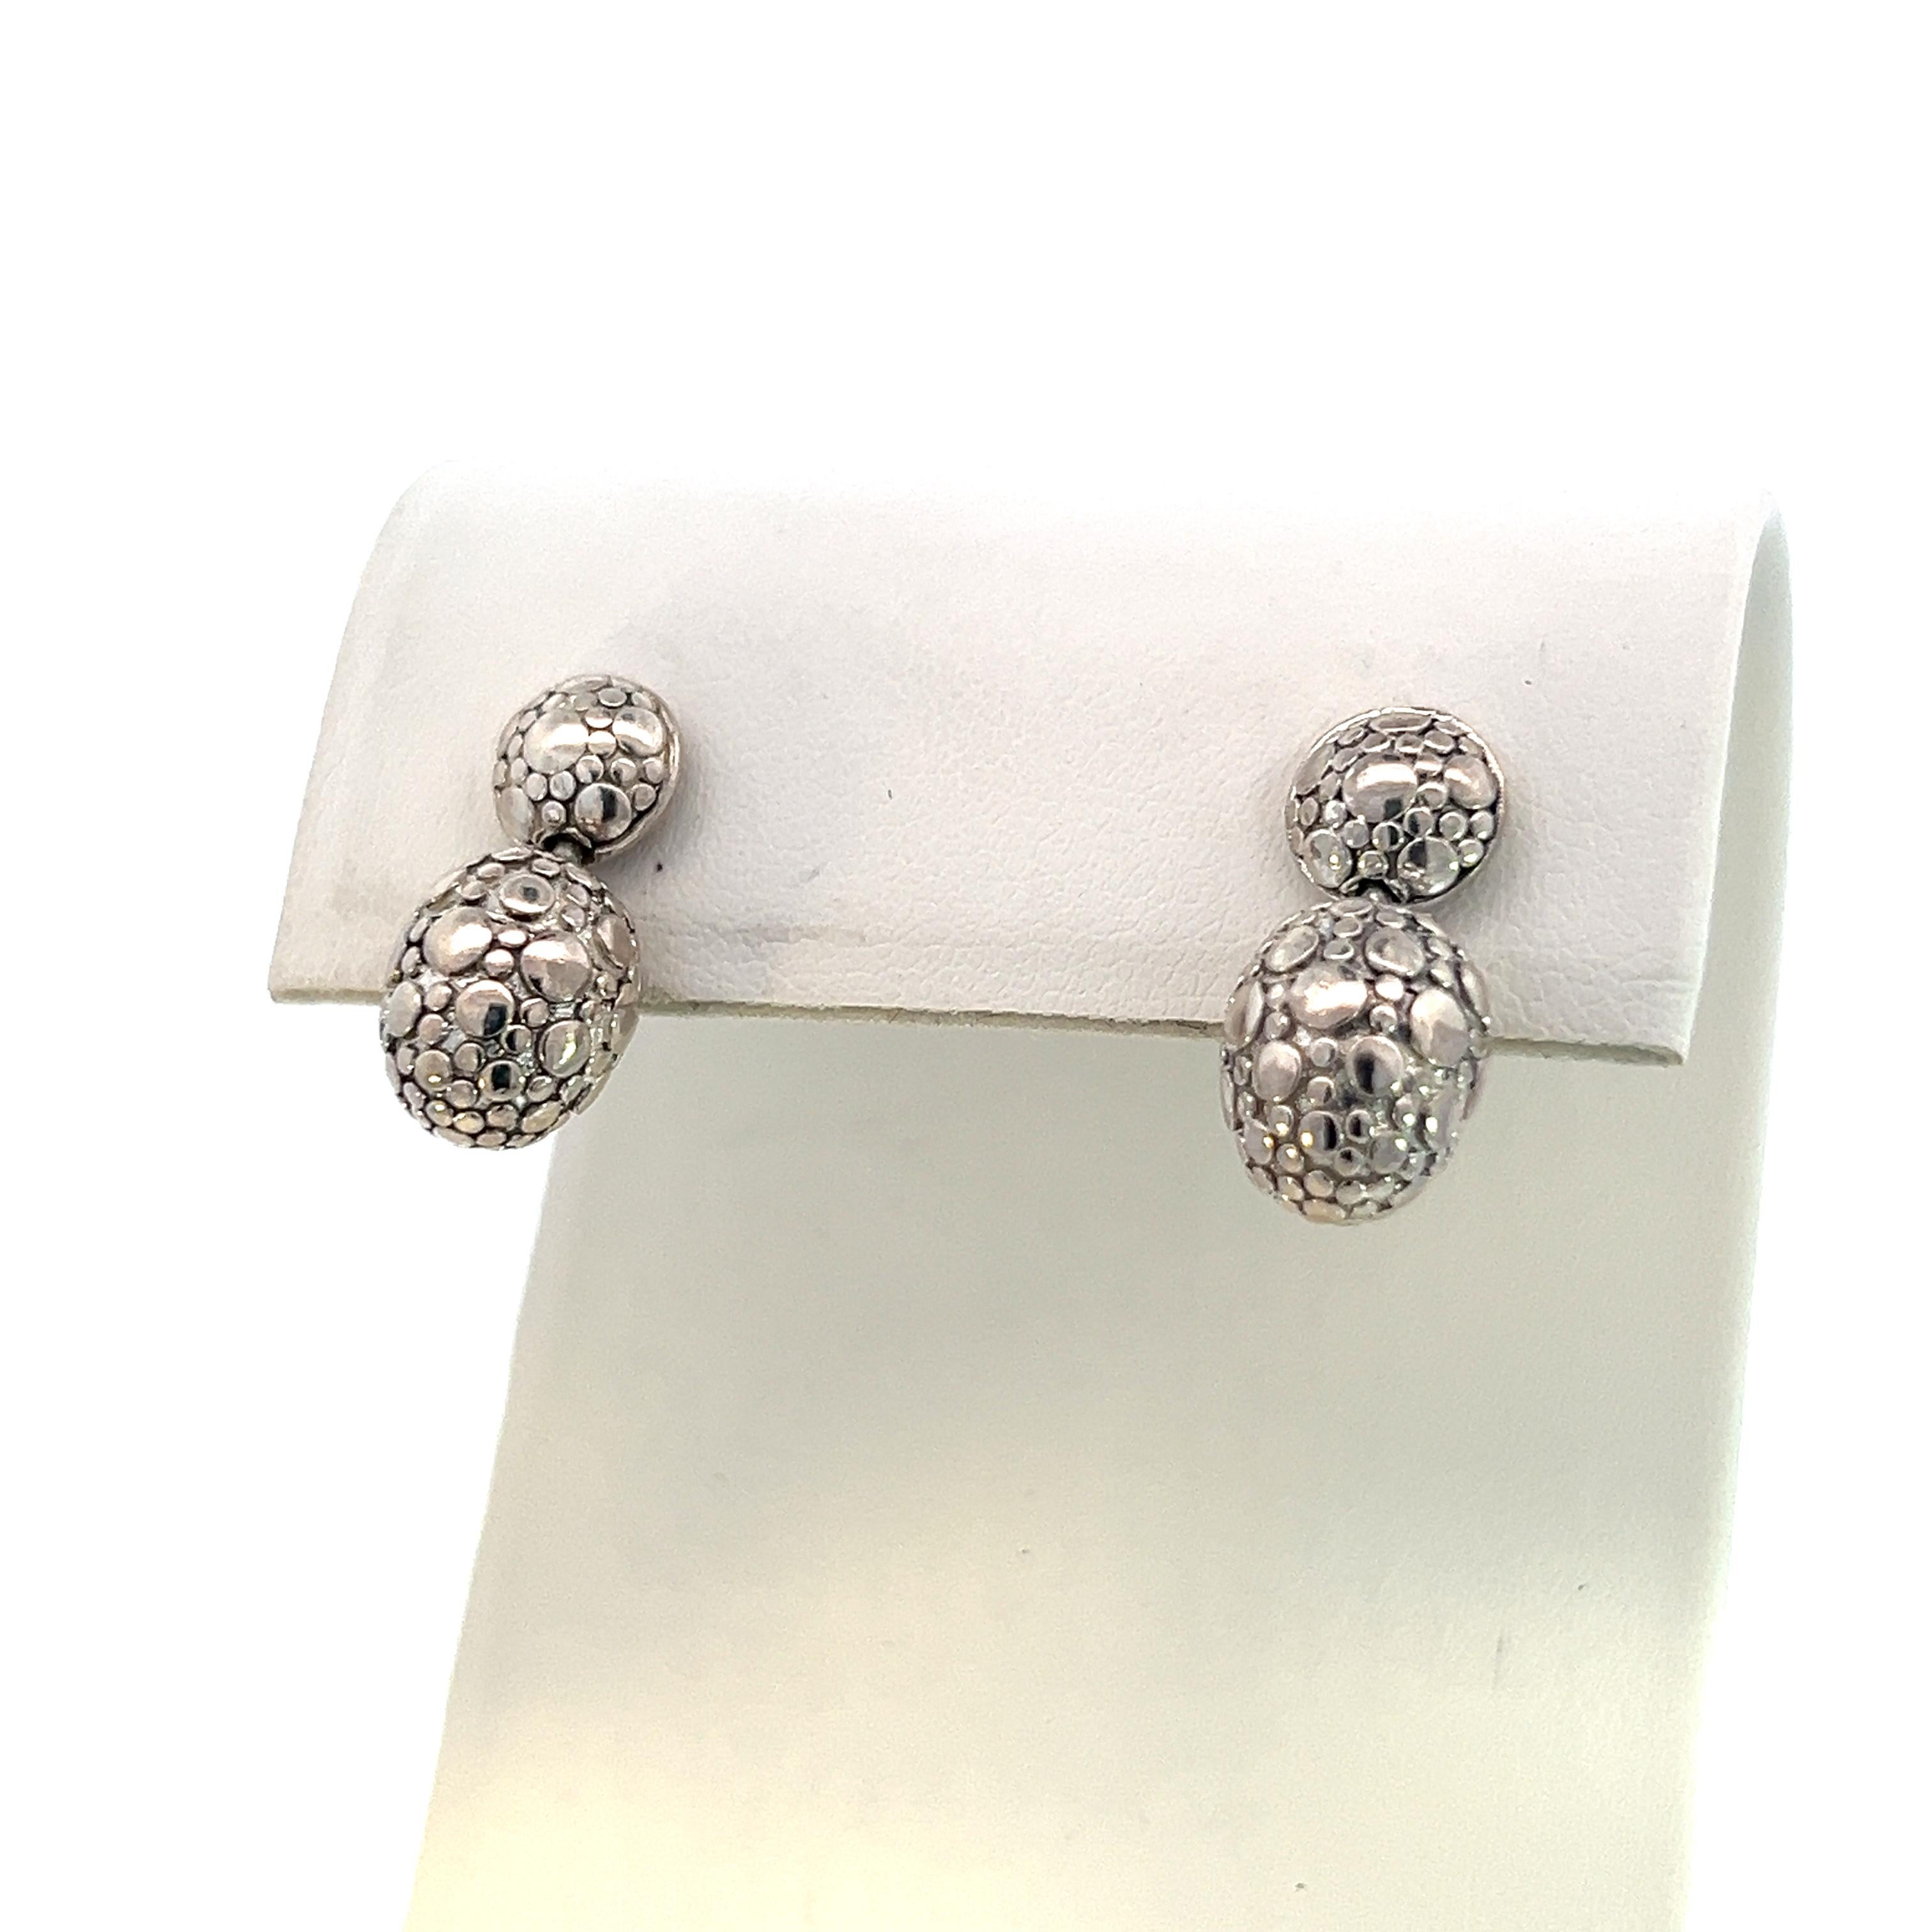 John Hardy Estate Pebble Dot Earrings Sterling Silver JH84

TRUSTED SELLER SINCE 2002

PLEASE SEE OUR HUNDREDS OF POSITIVE FEEDBACKS FROM OUR CLIENTS!!

FREE SHIPPING!!

DETAILS
Style: Pebble Dot Earrings
Weight: 6.6 Grams
Closure: Push Back
Metal: